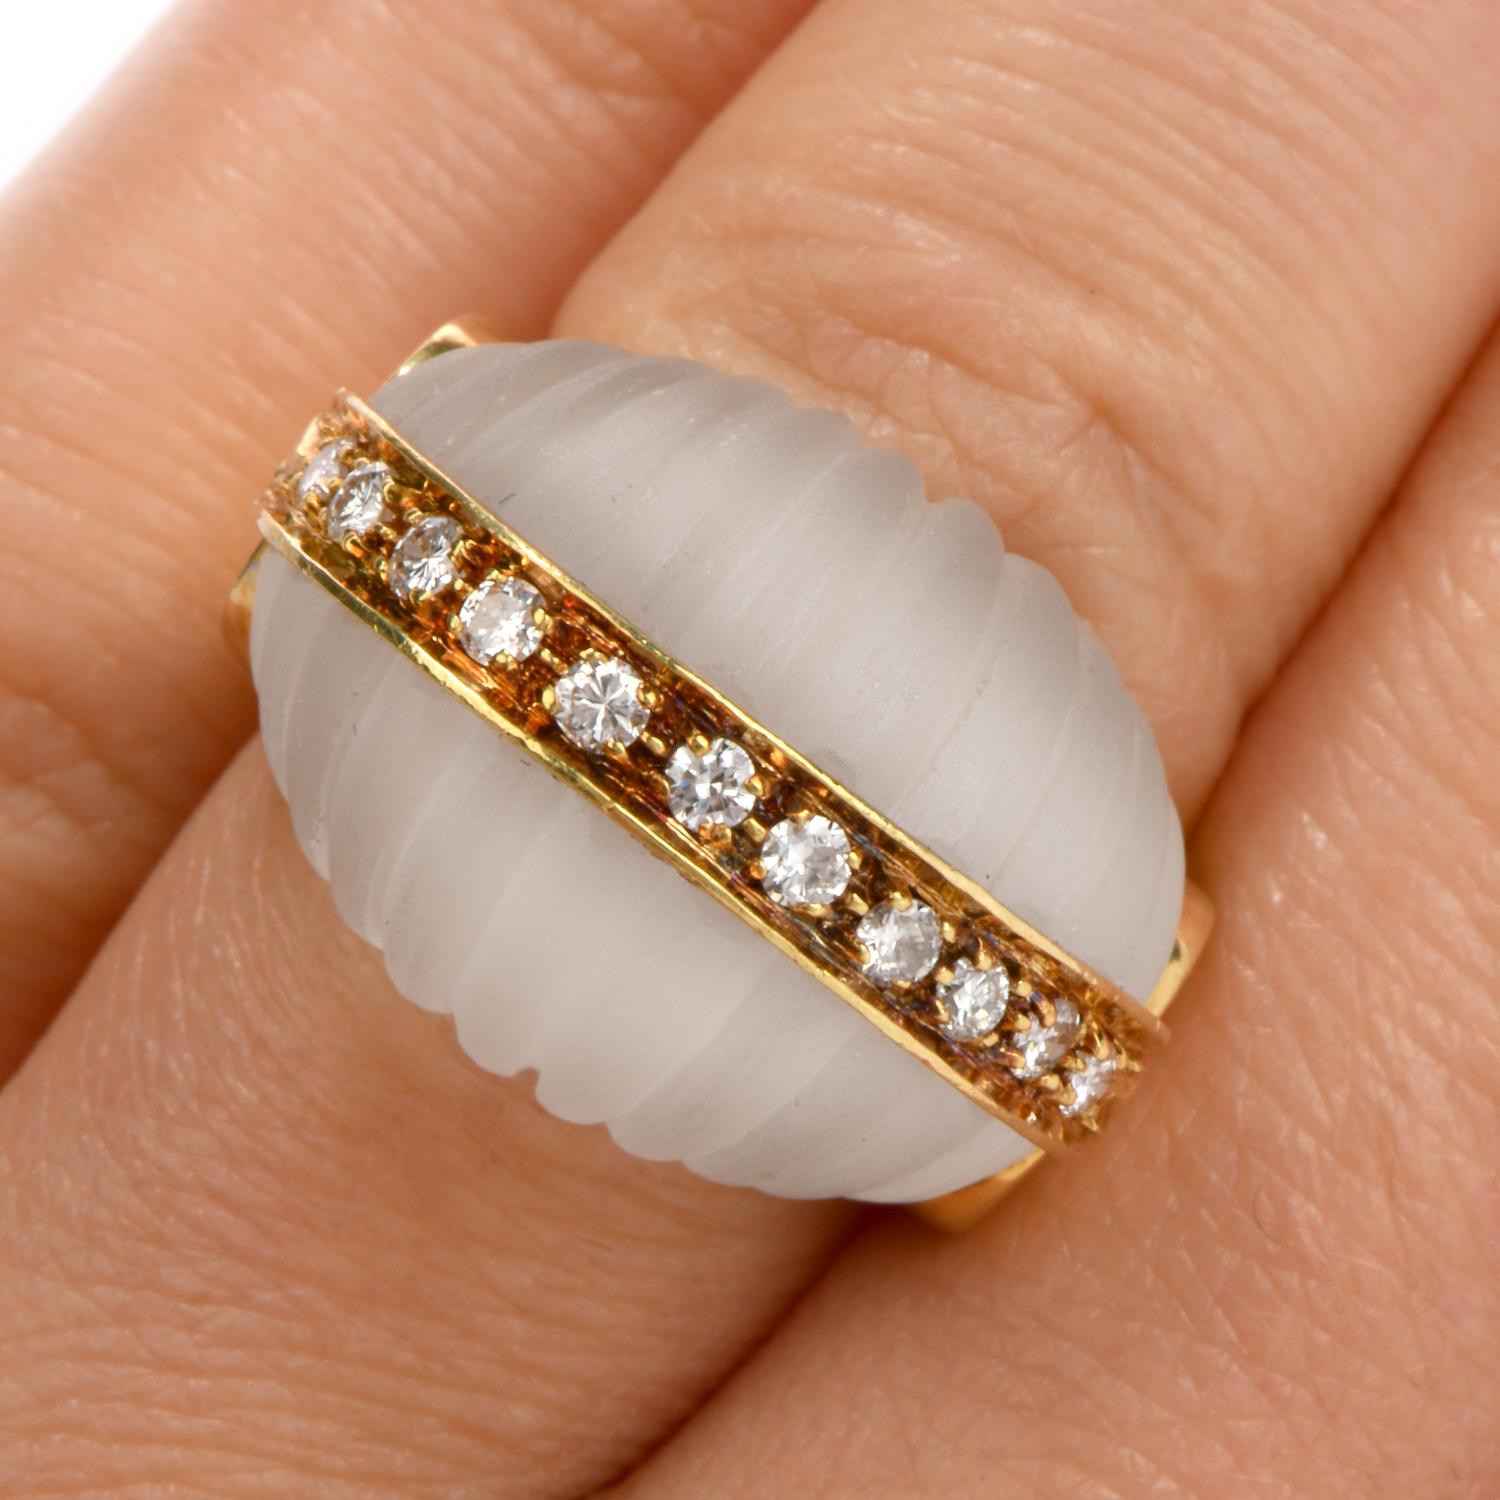  Vintage 1970's Rock Crystal Diamond 18k gold  Bombé Ring. An American 18k yellow gold dome 

cockatil ring with diamonds and carved rock crystal.

This ring has 11 round-cut diamonds with an approximate total weight .0.50 carats, G-H color